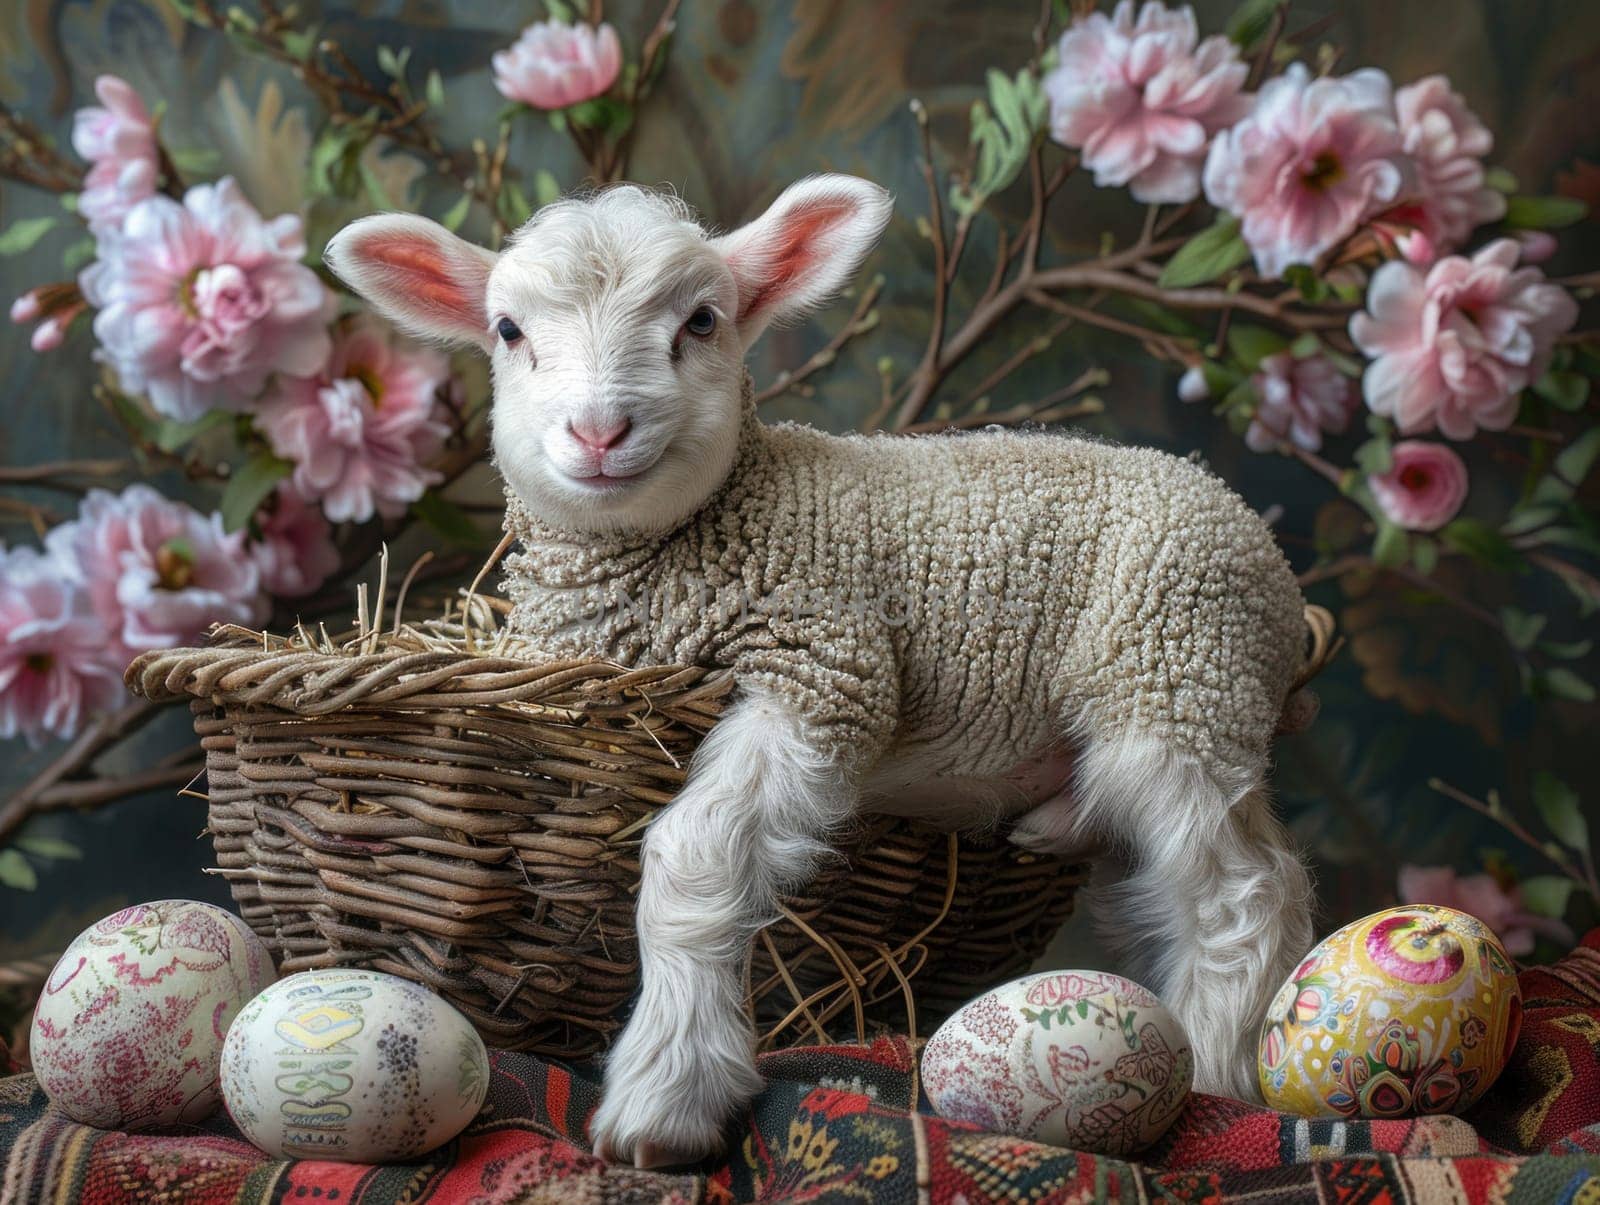 Baby Lamb Sitting in Basket With Easter Eggs by but_photo